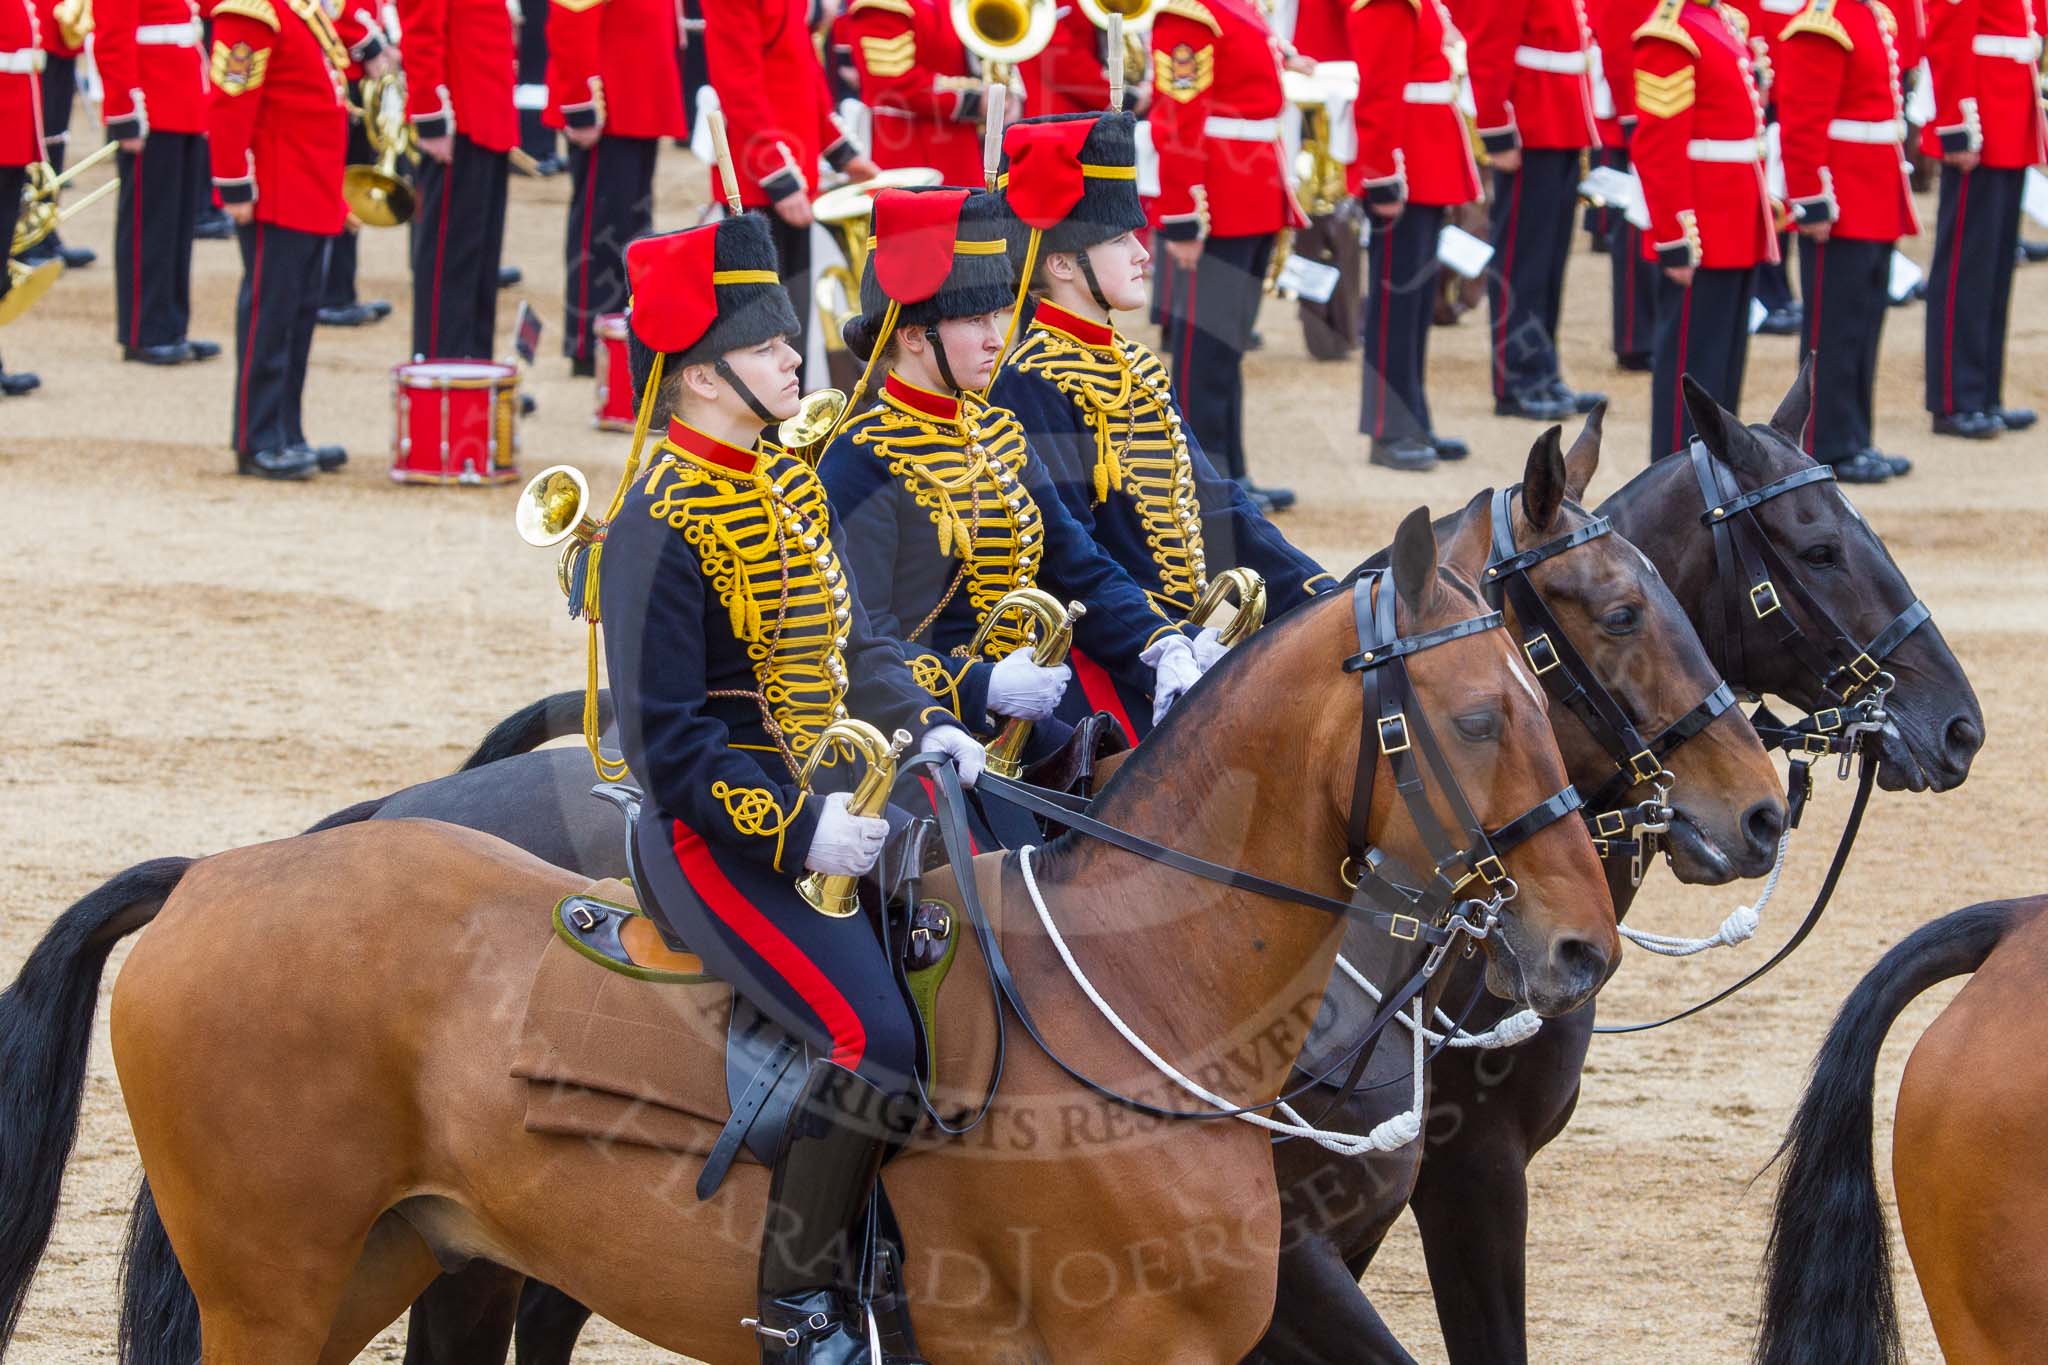 Trooping the Colour 2014.
Horse Guards Parade, Westminster,
London SW1A,

United Kingdom,
on 14 June 2014 at 11:55, image #752